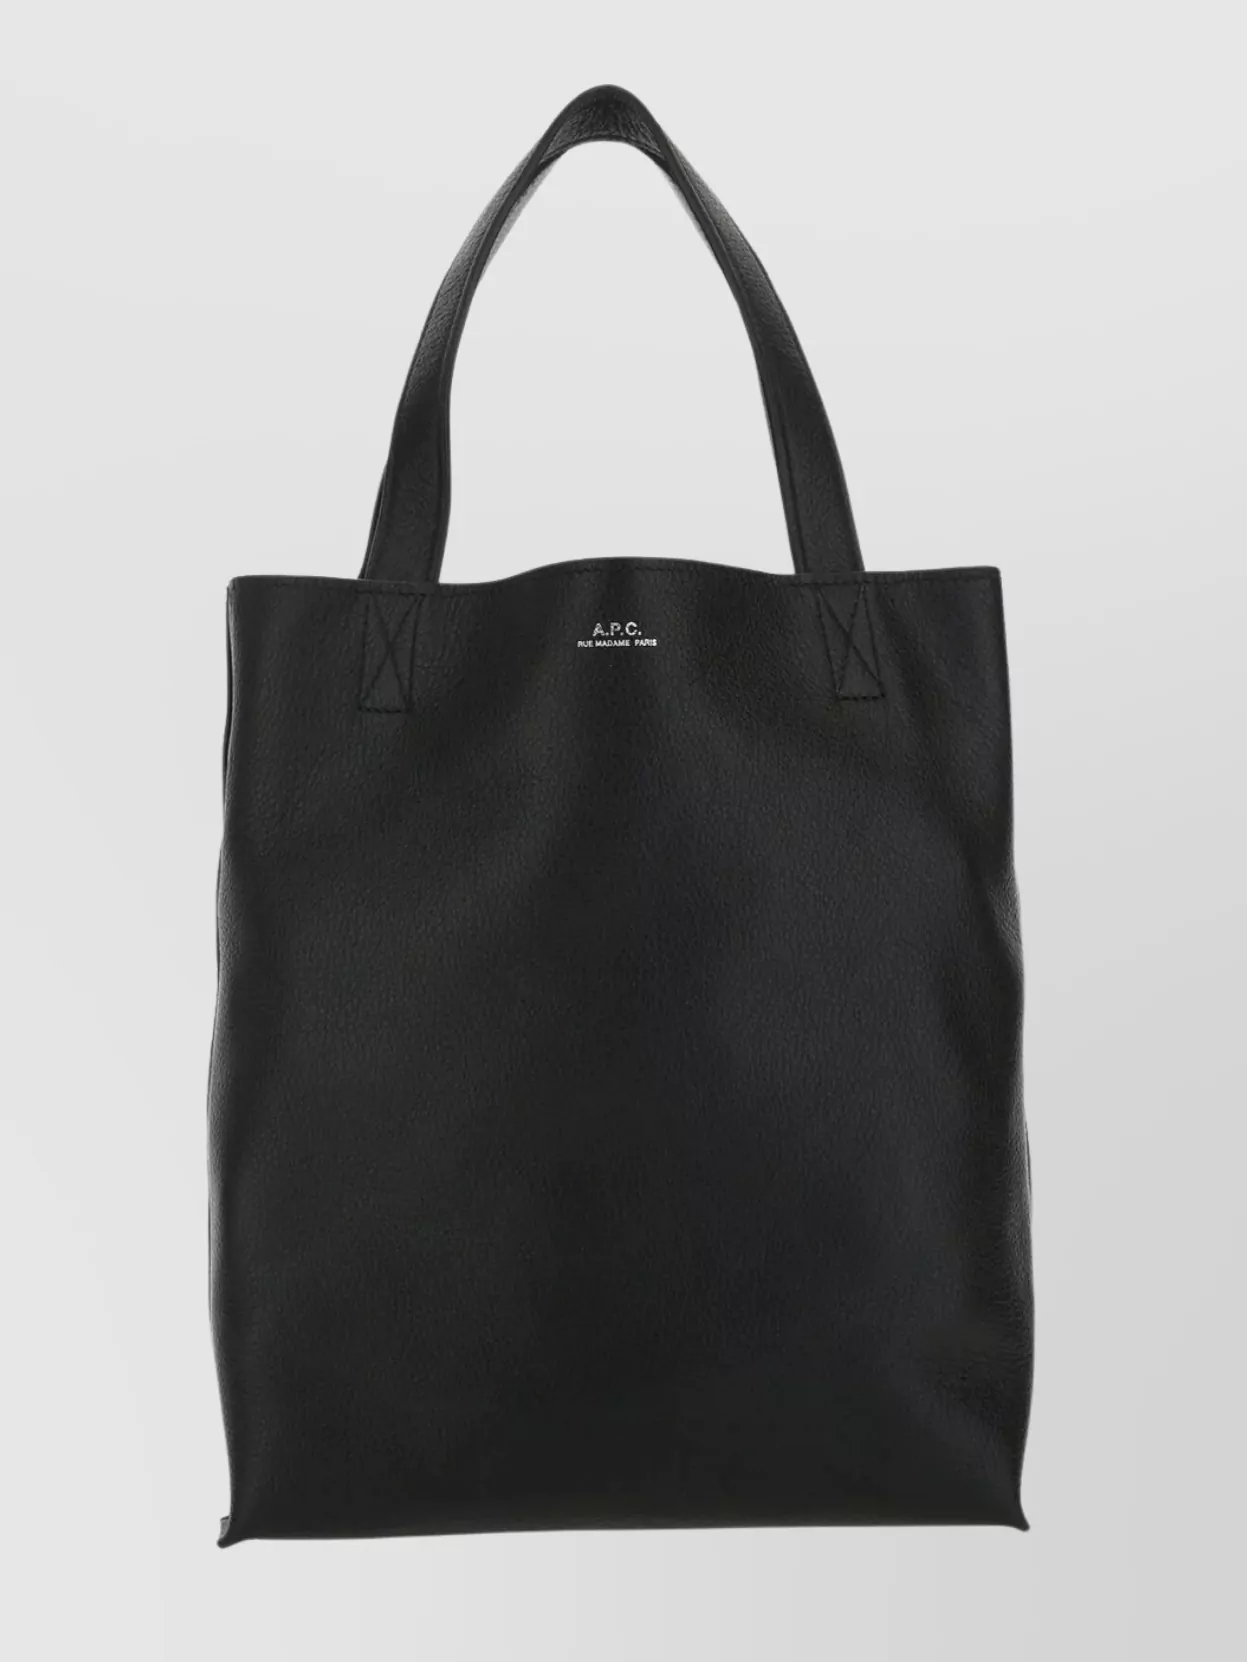 APC STRUCTURED LEATHER TOTE BAG